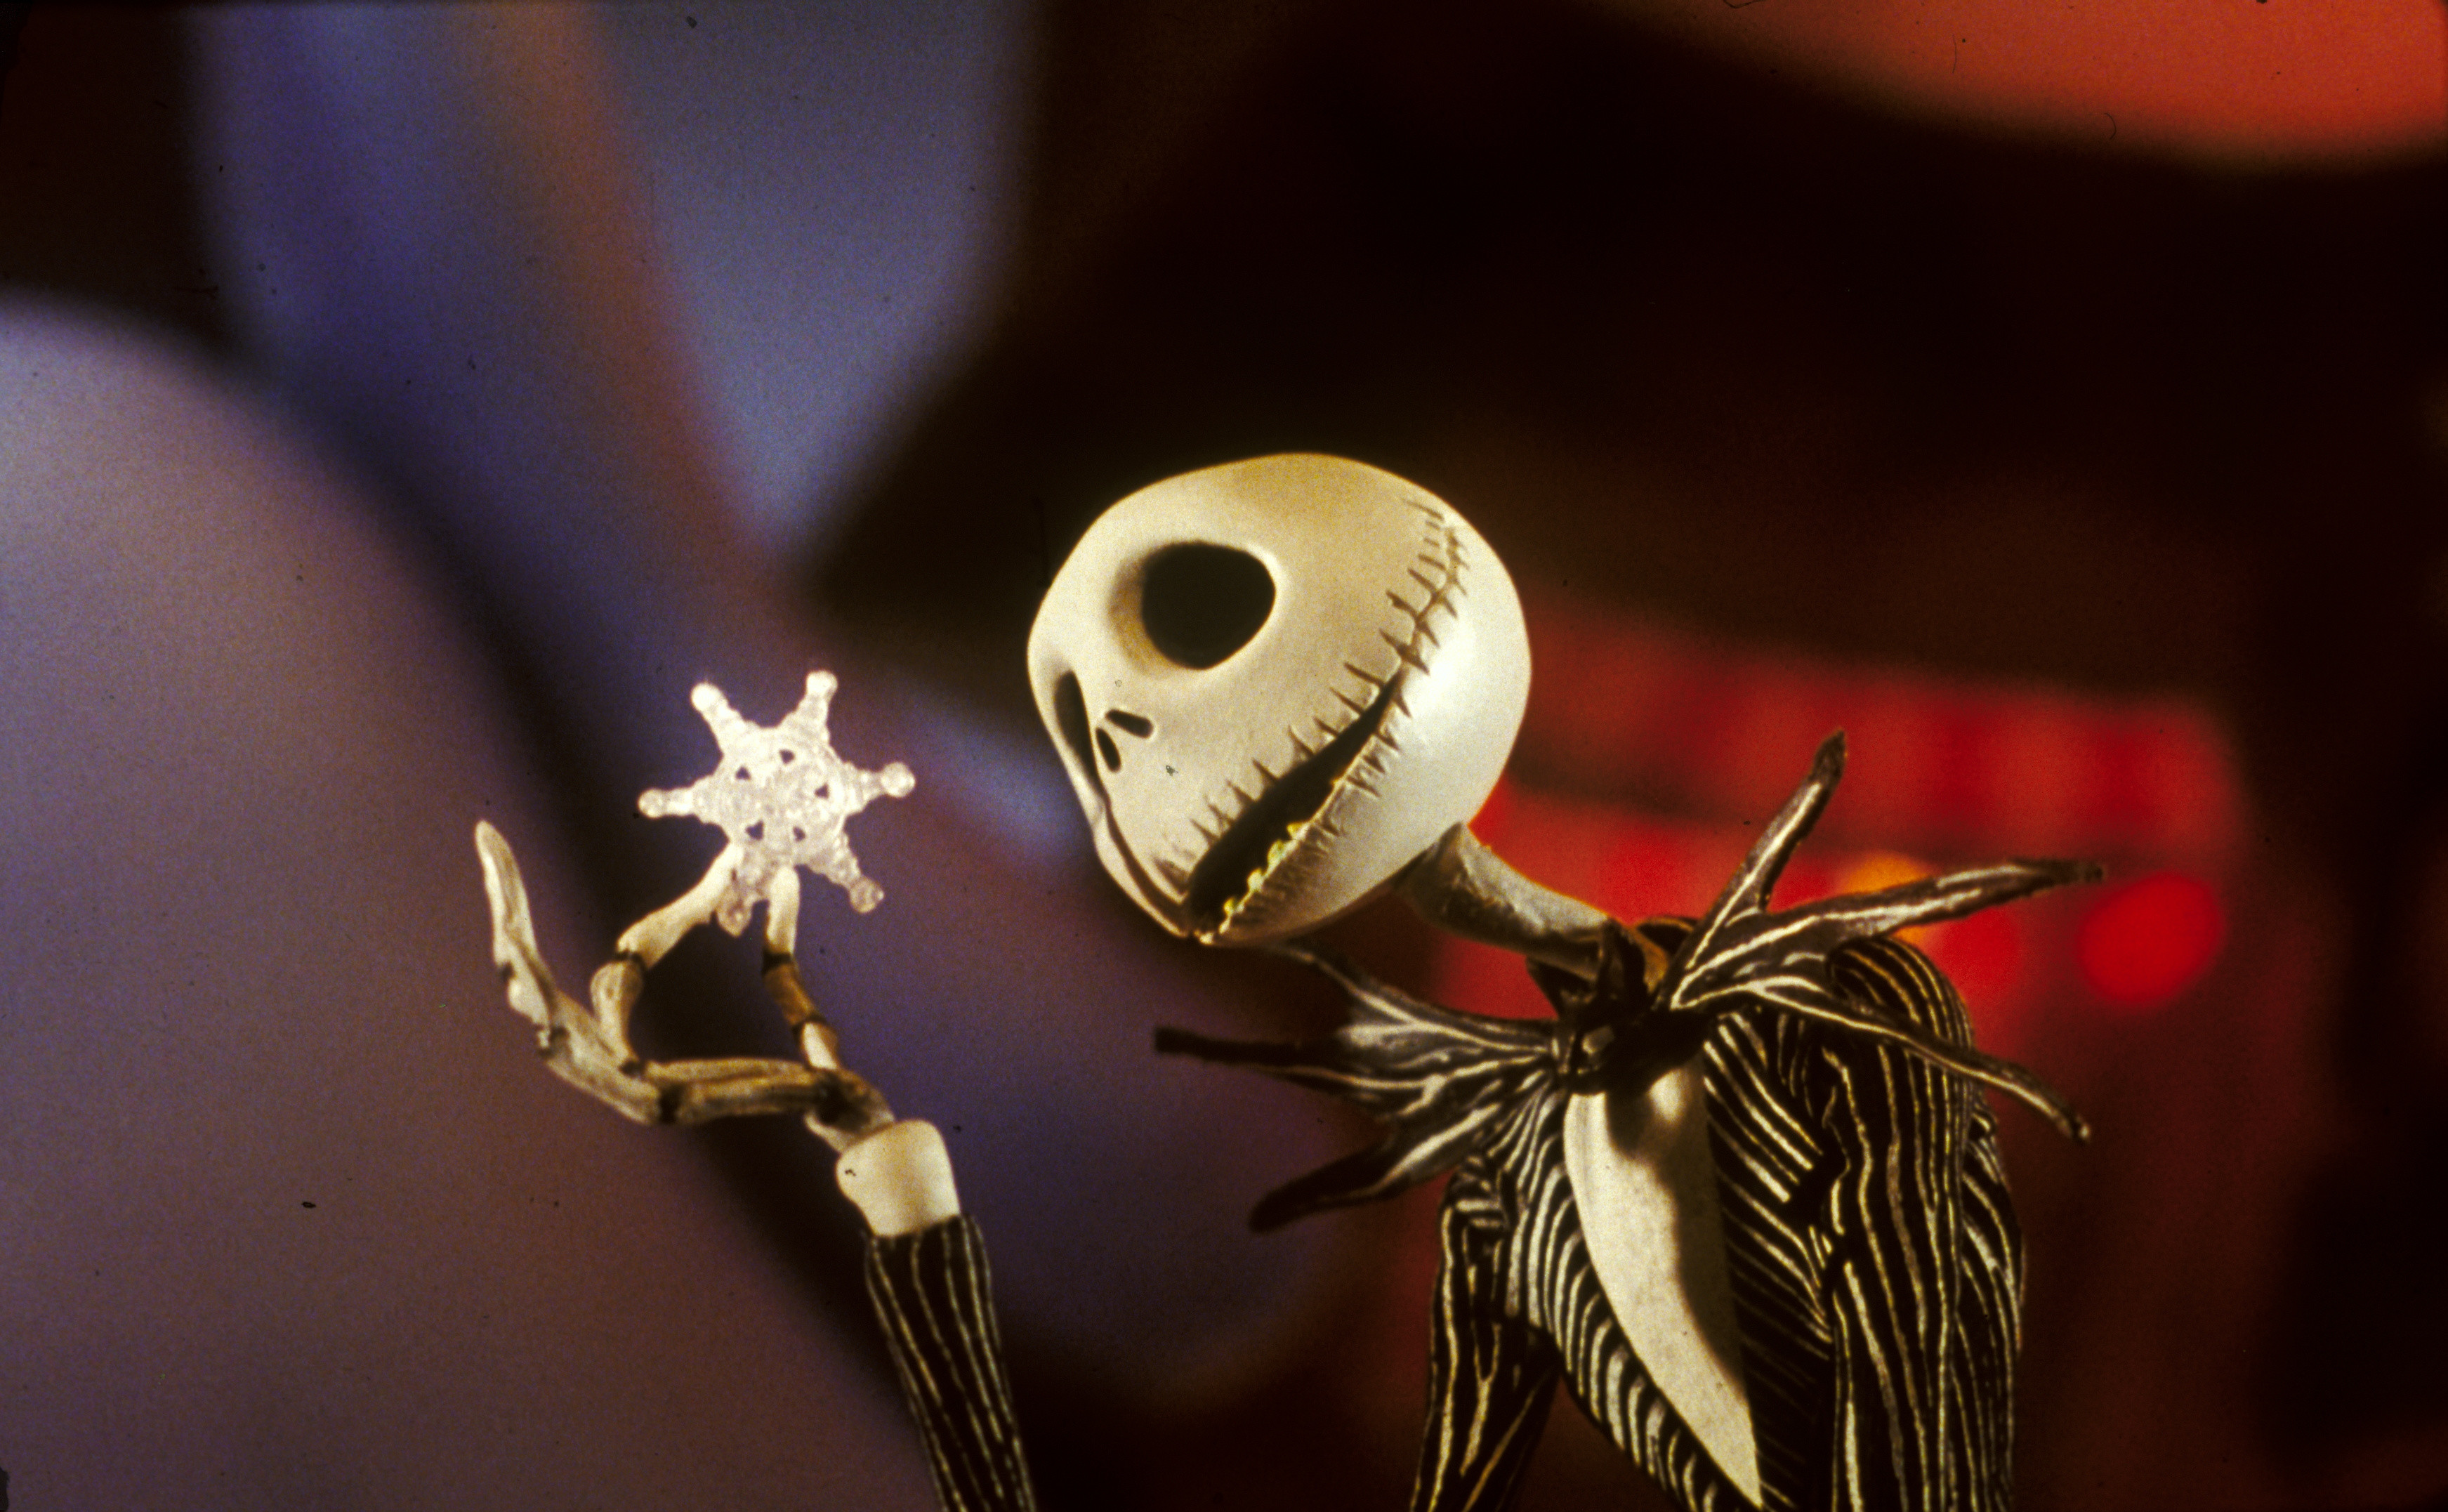 3486x2153 jack skellington nightmare before christmas wallpapers ultra hd windows  wallpapers hd download free amazing background images mac tablet 3486Ã2153  Wallpaper ...